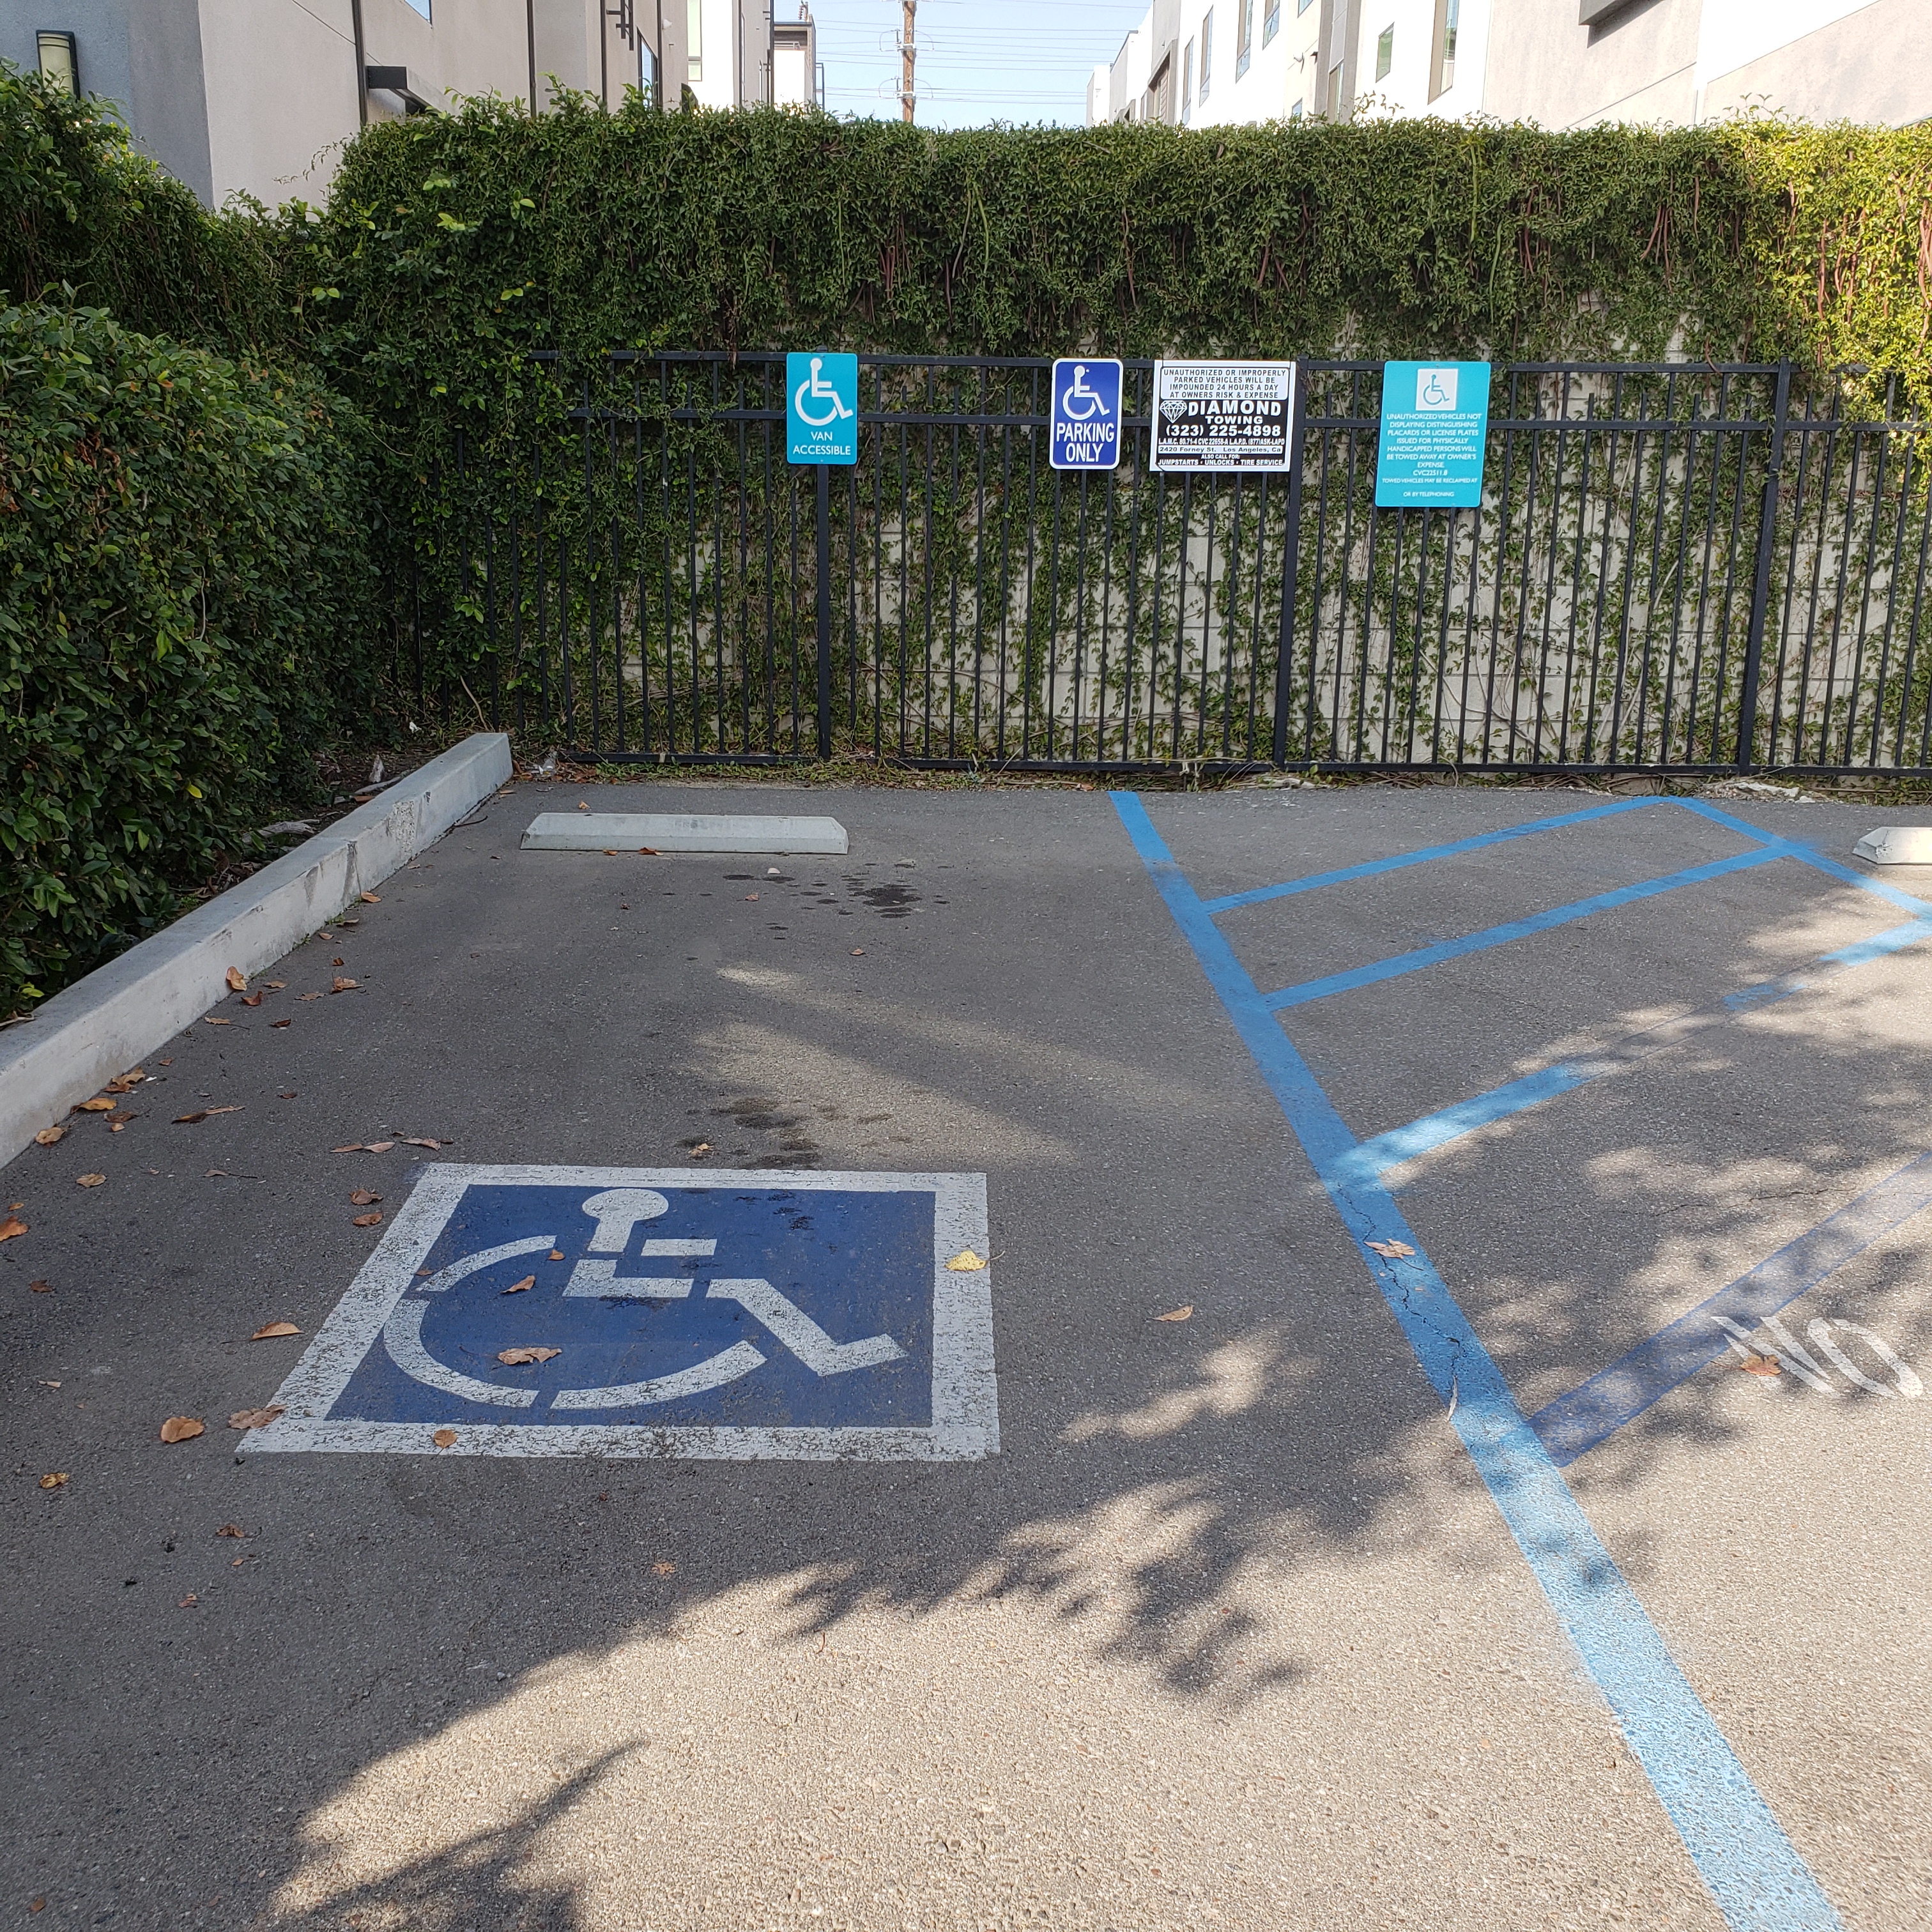 Image of tres lomas garden apartments accessible parking area. accessibility symbol painted in blue and signs posted on gate marking accessible parking area.